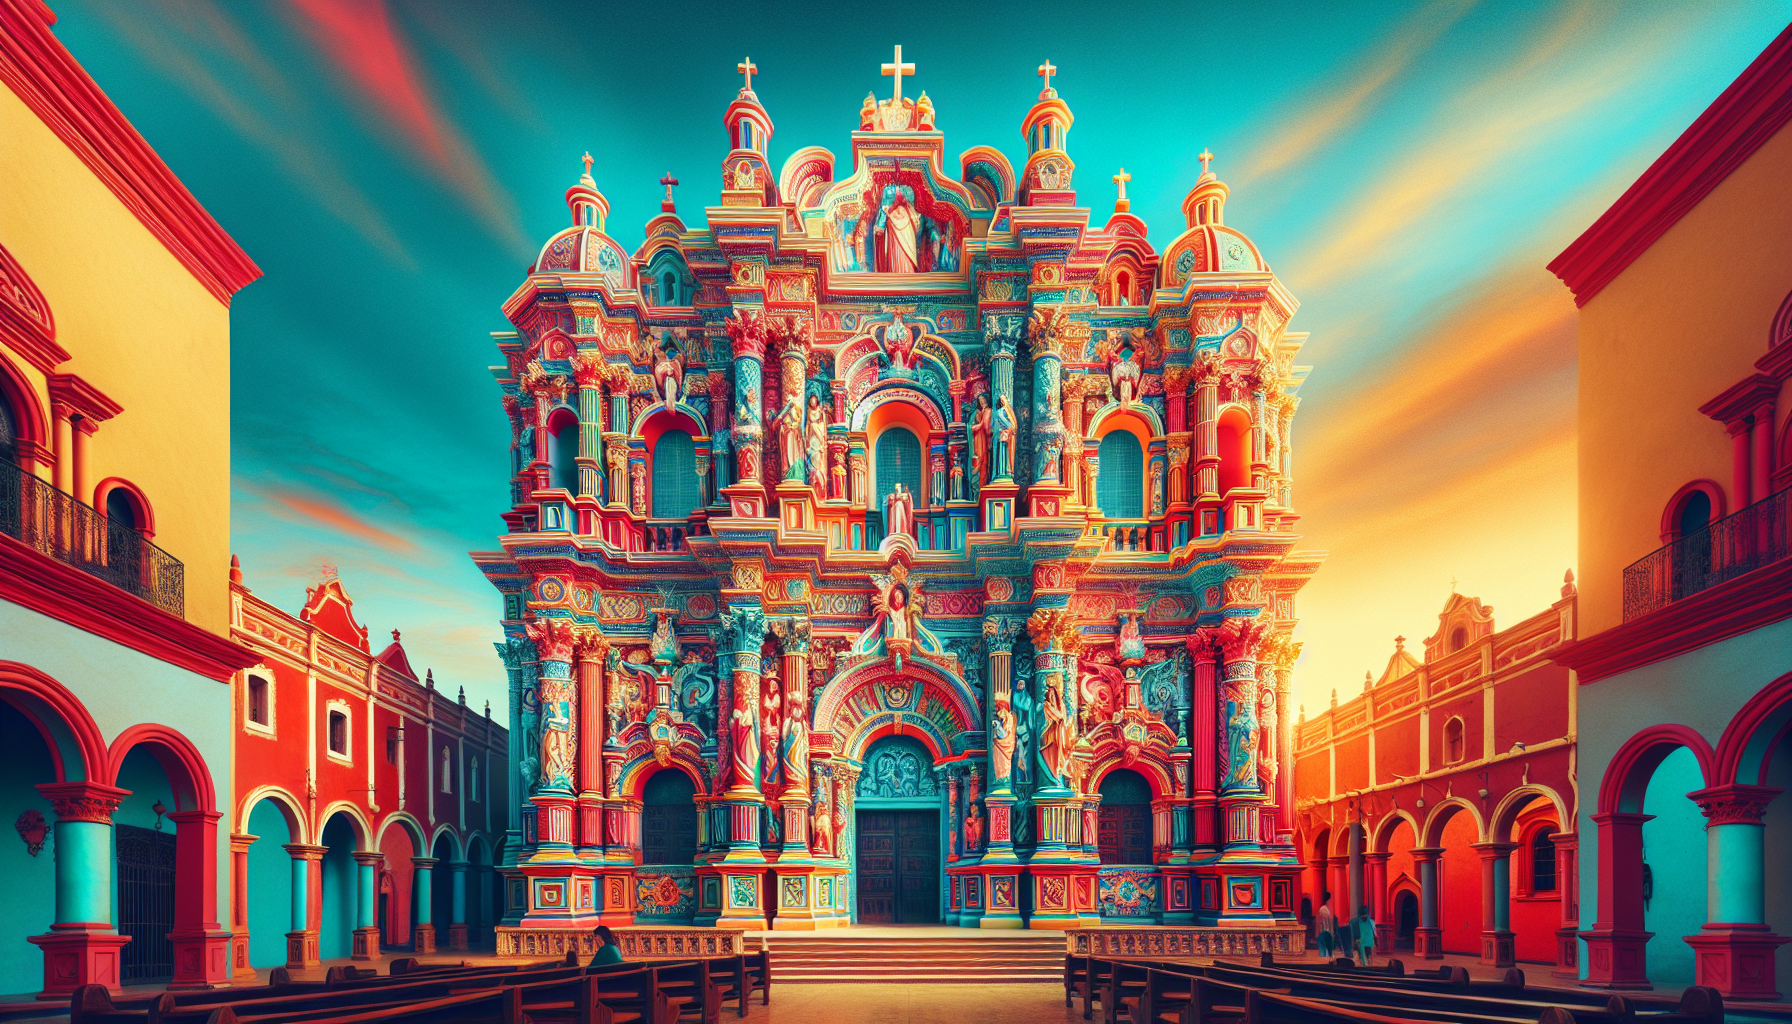 Create an image of a stunning church in Mexicali, showcasing intricate architectural details and vibrant colors, set against a clear blue sky. The church should exude a sense of history and spiritual